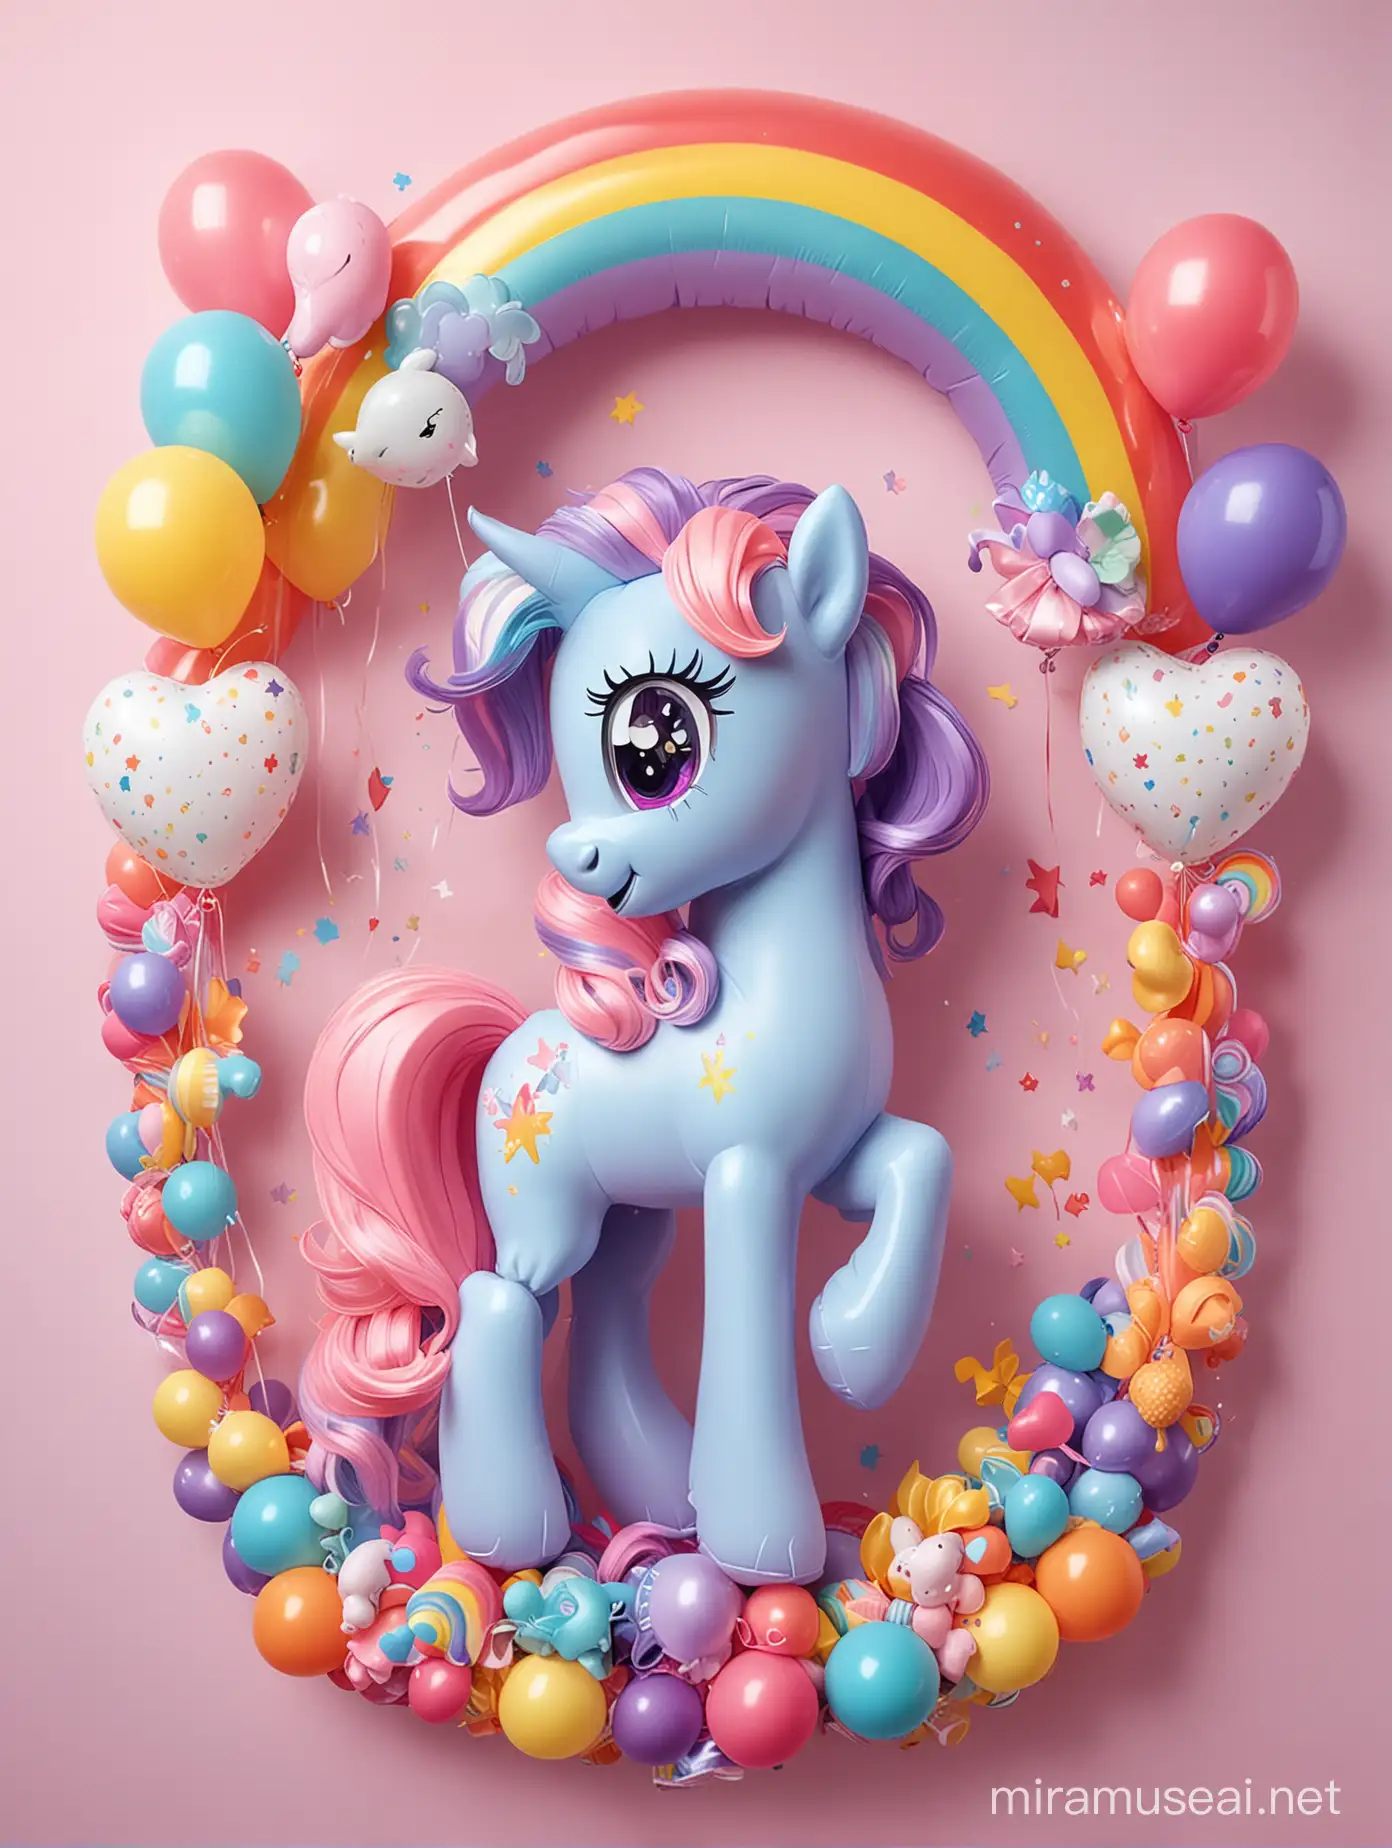 Cheerful My Little Pony Surrounded by Vibrant Pastel Colors Rainbows and Balloons